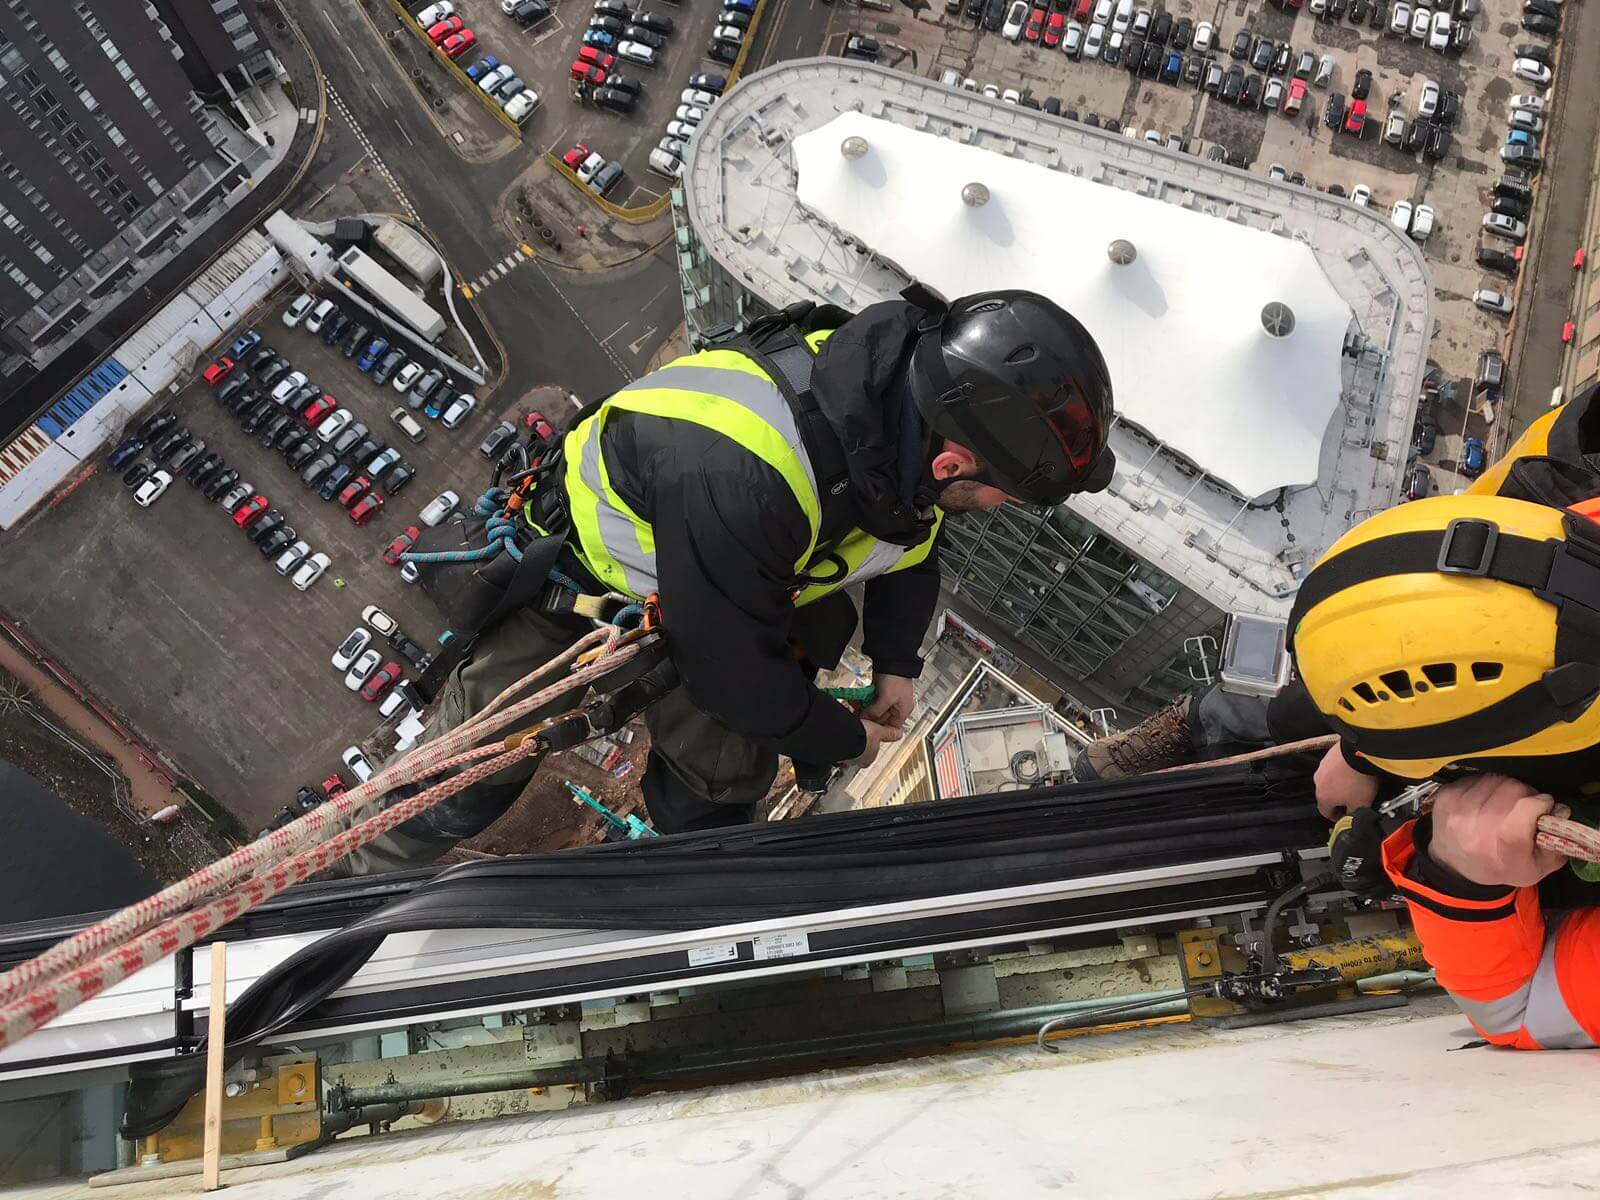 Two men working on the edge of a building, repairing glass.